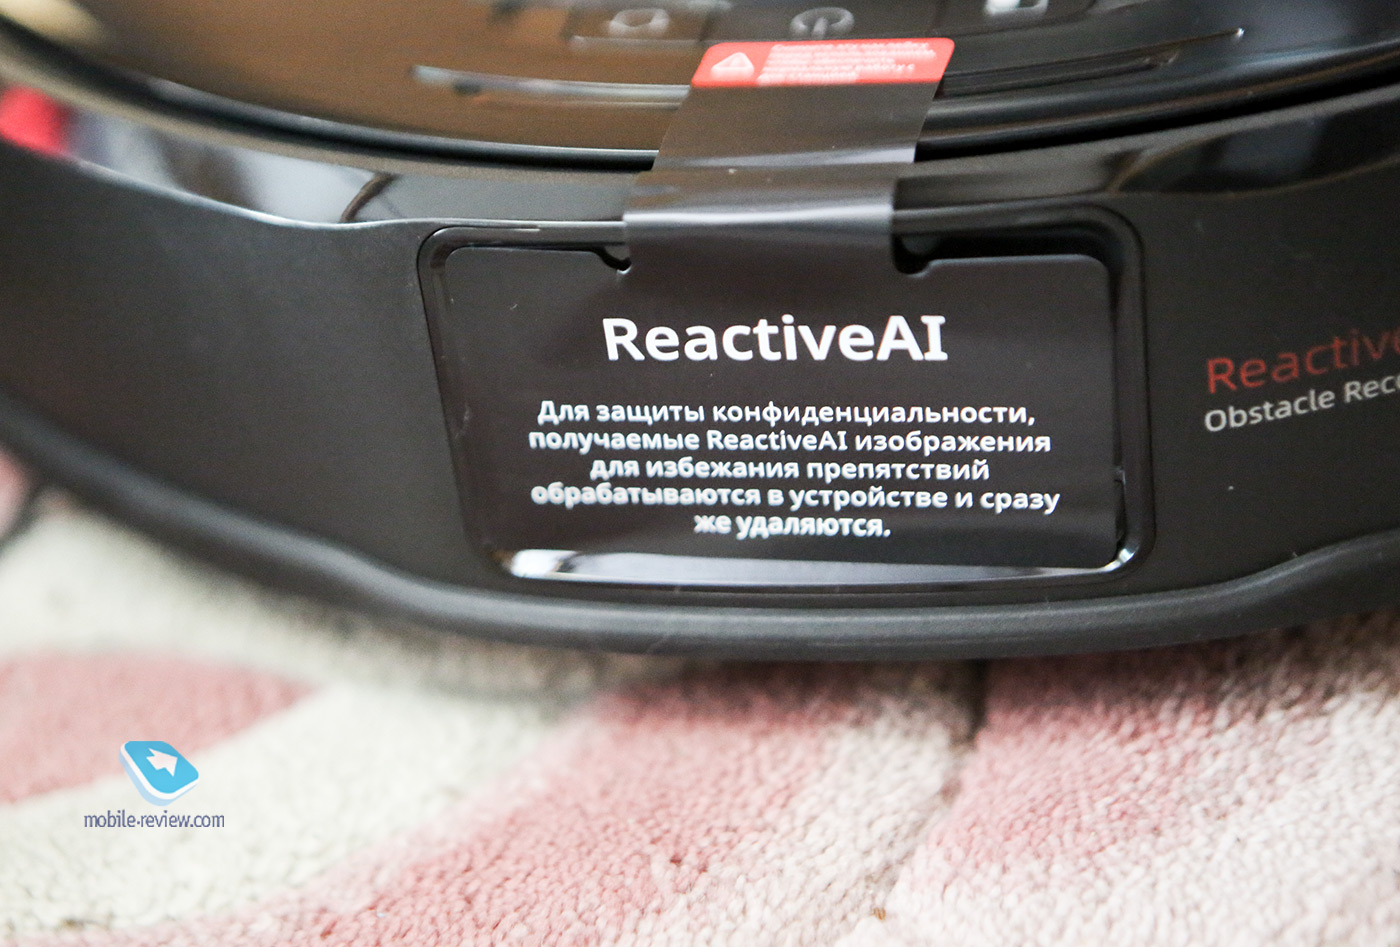 Robot vacuum cleaner with machine vision and AI algorithms - Roborock S6 MaxV